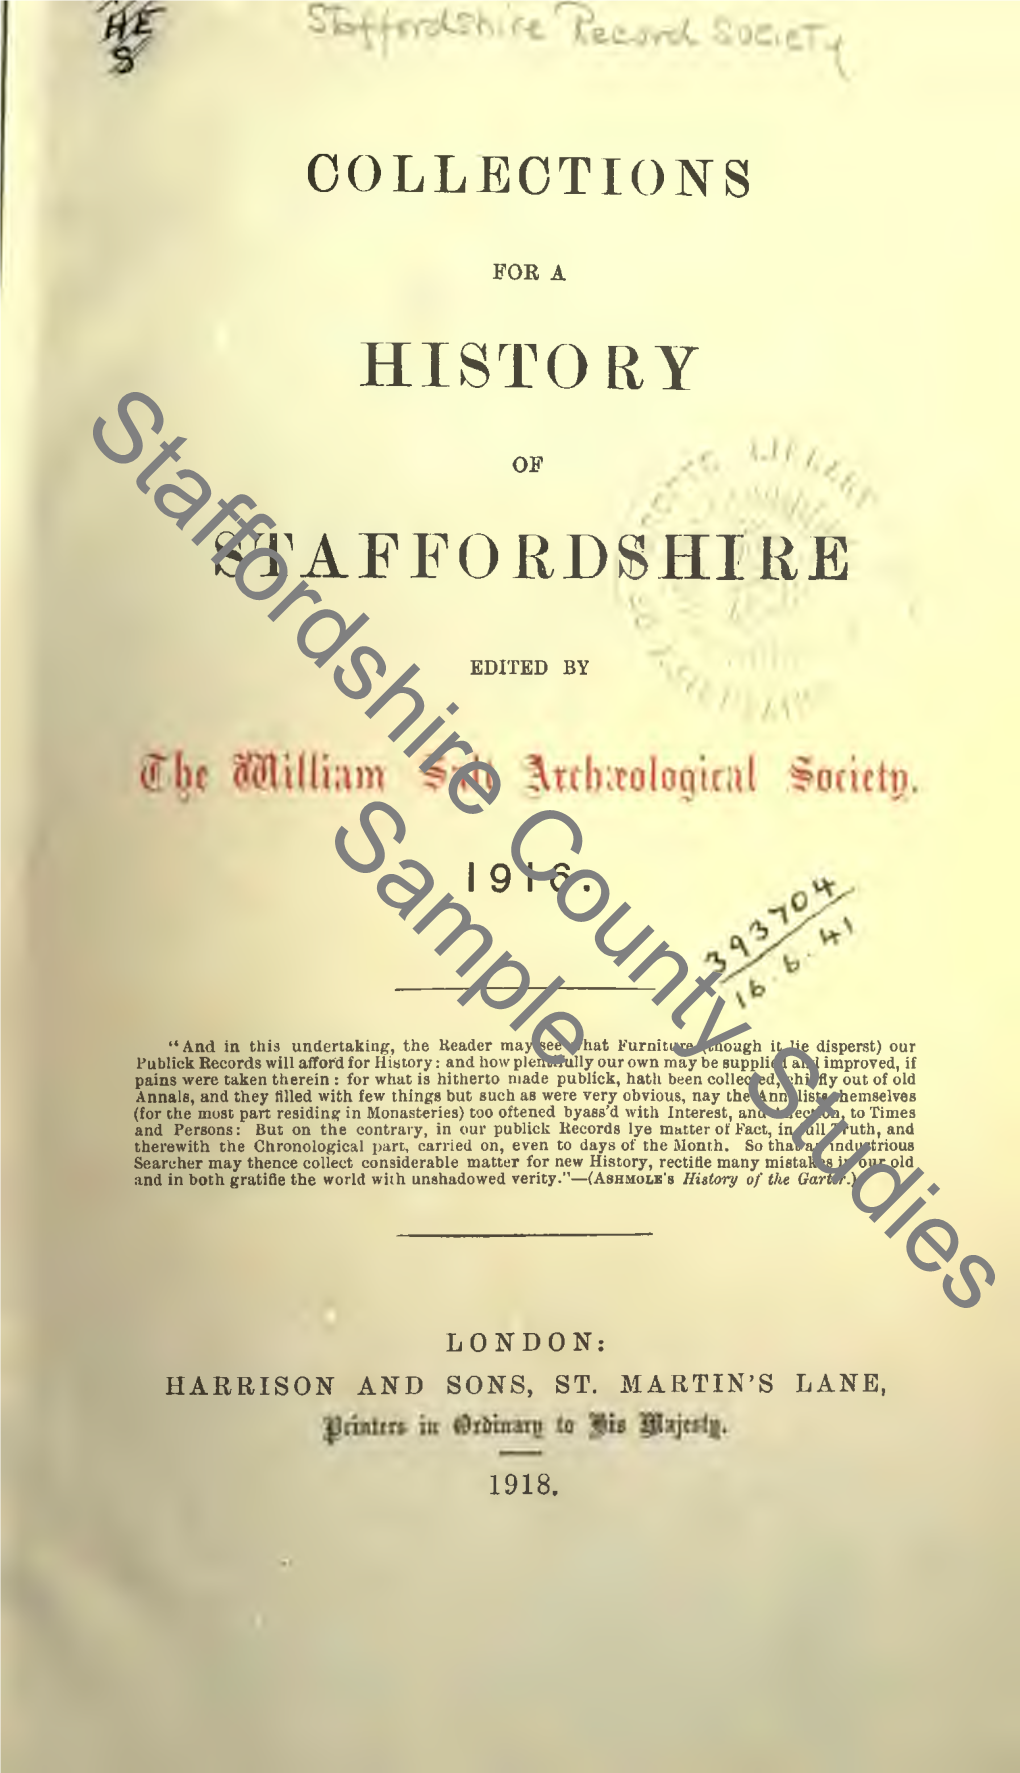 Collections for a History of Staffordshire, 1916